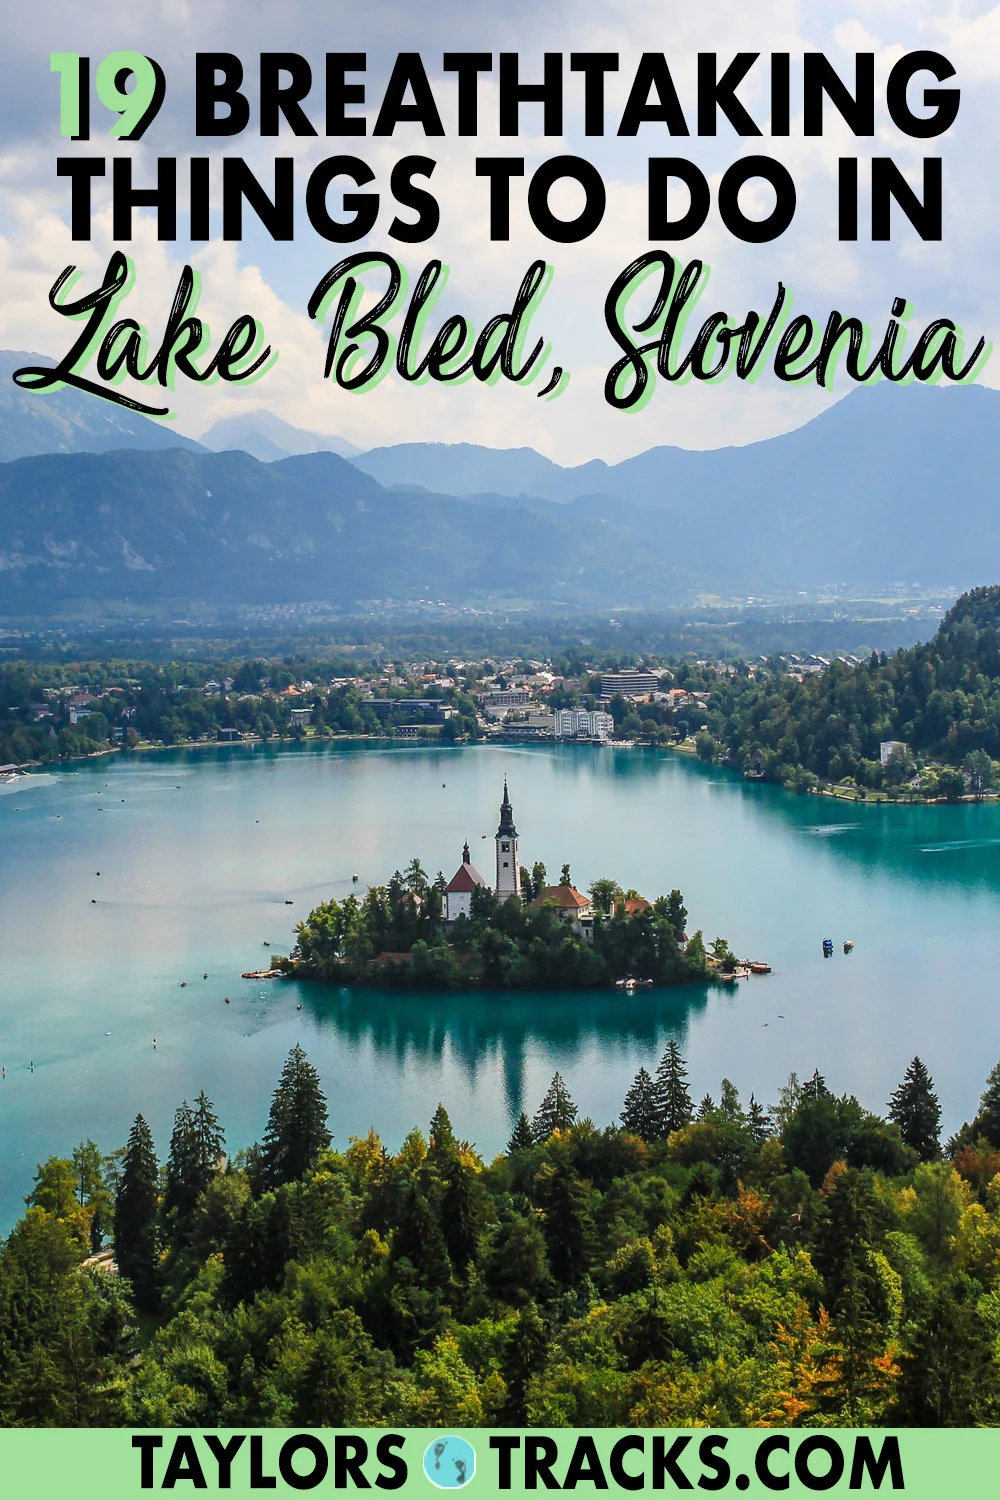 Discover the top things to do in Bled and beyond with this detailed Lake Bled travel guide that has Lake Bled activities for travellers who crave adventure, nature and laid-back beauty. Click to find the best things to do in Lake Bled for your Slovenia itinerary!